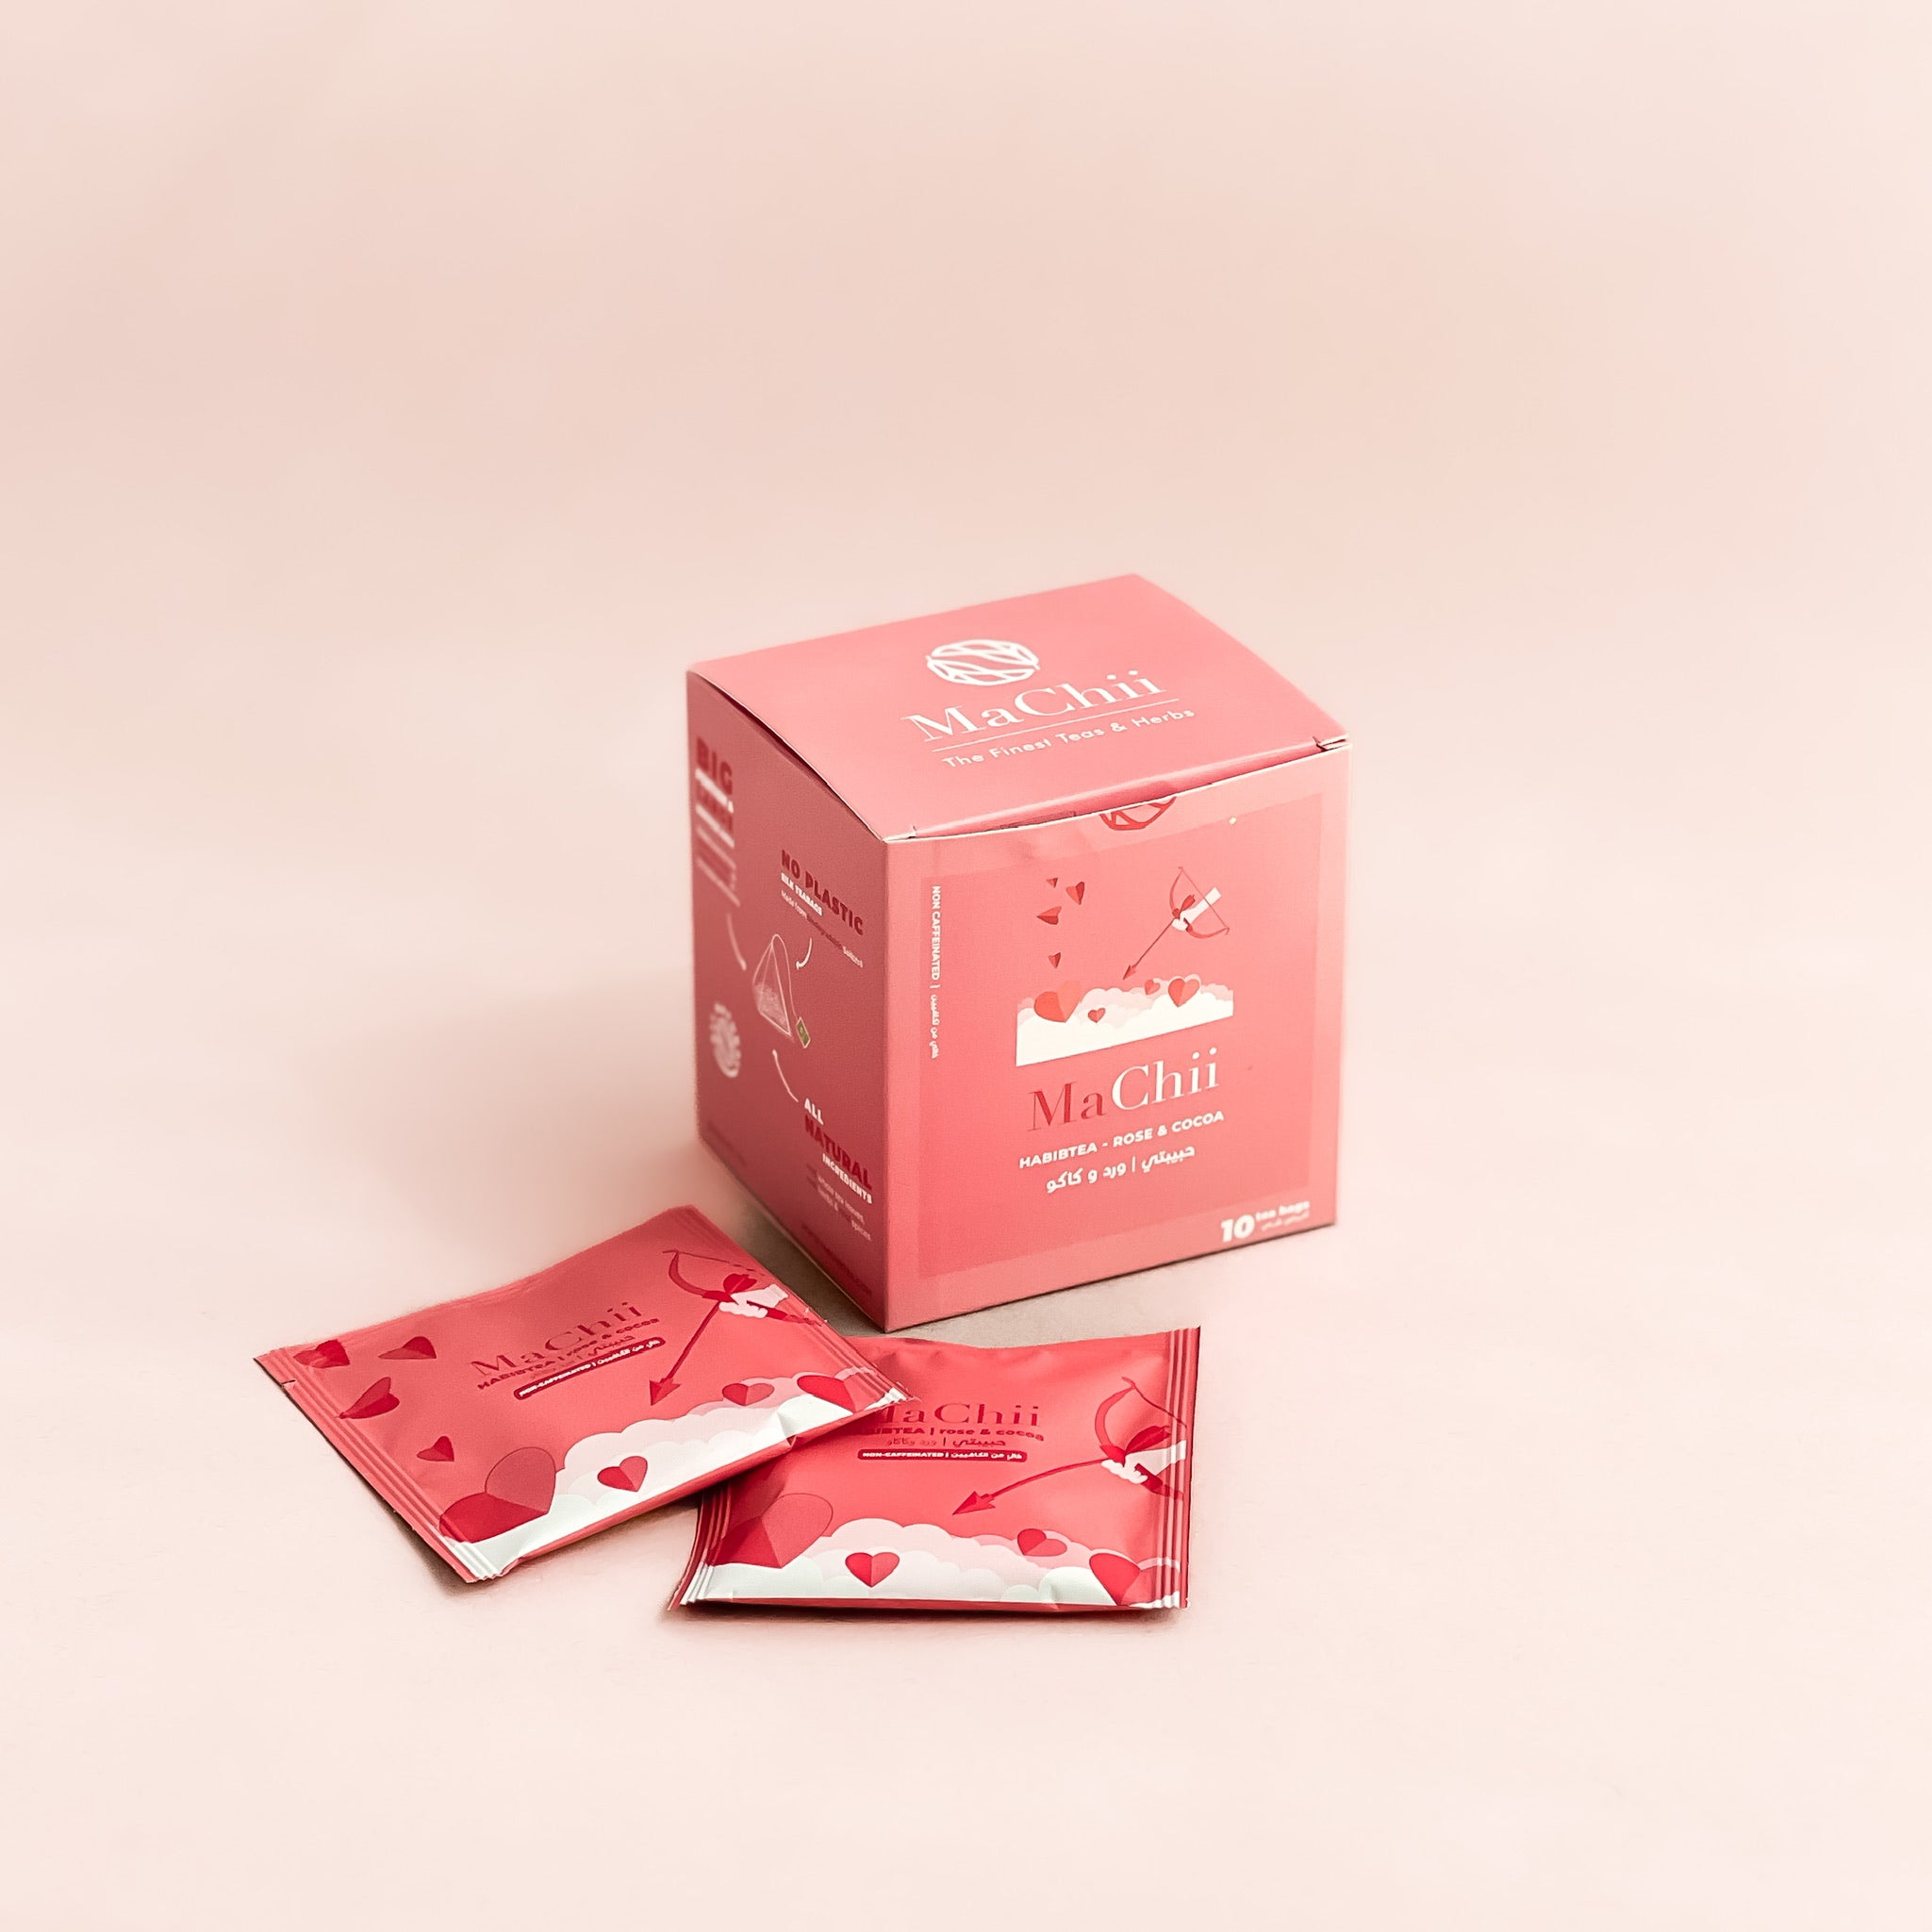 organic cocoa and rose tea in a pink envelope tea bag next to a box of 10 teabags.